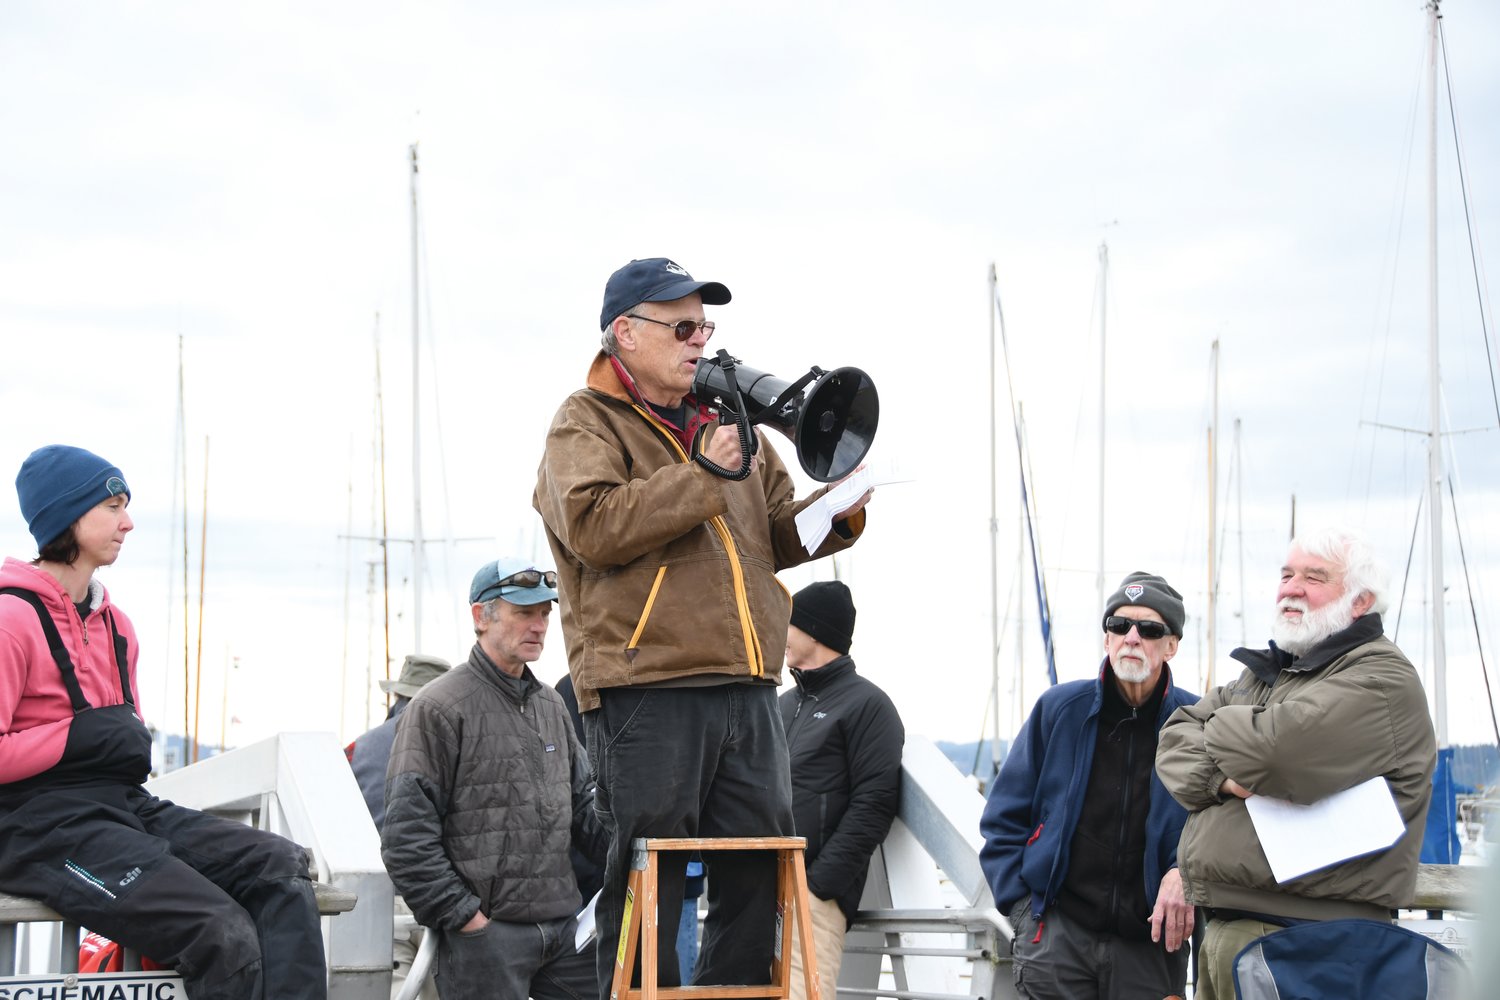 Jim Heumann, of the Shipwright’s Regatta, speaks to sailors at the Boat Haven A/B docks during the skipper’s meeting Saturday morning.